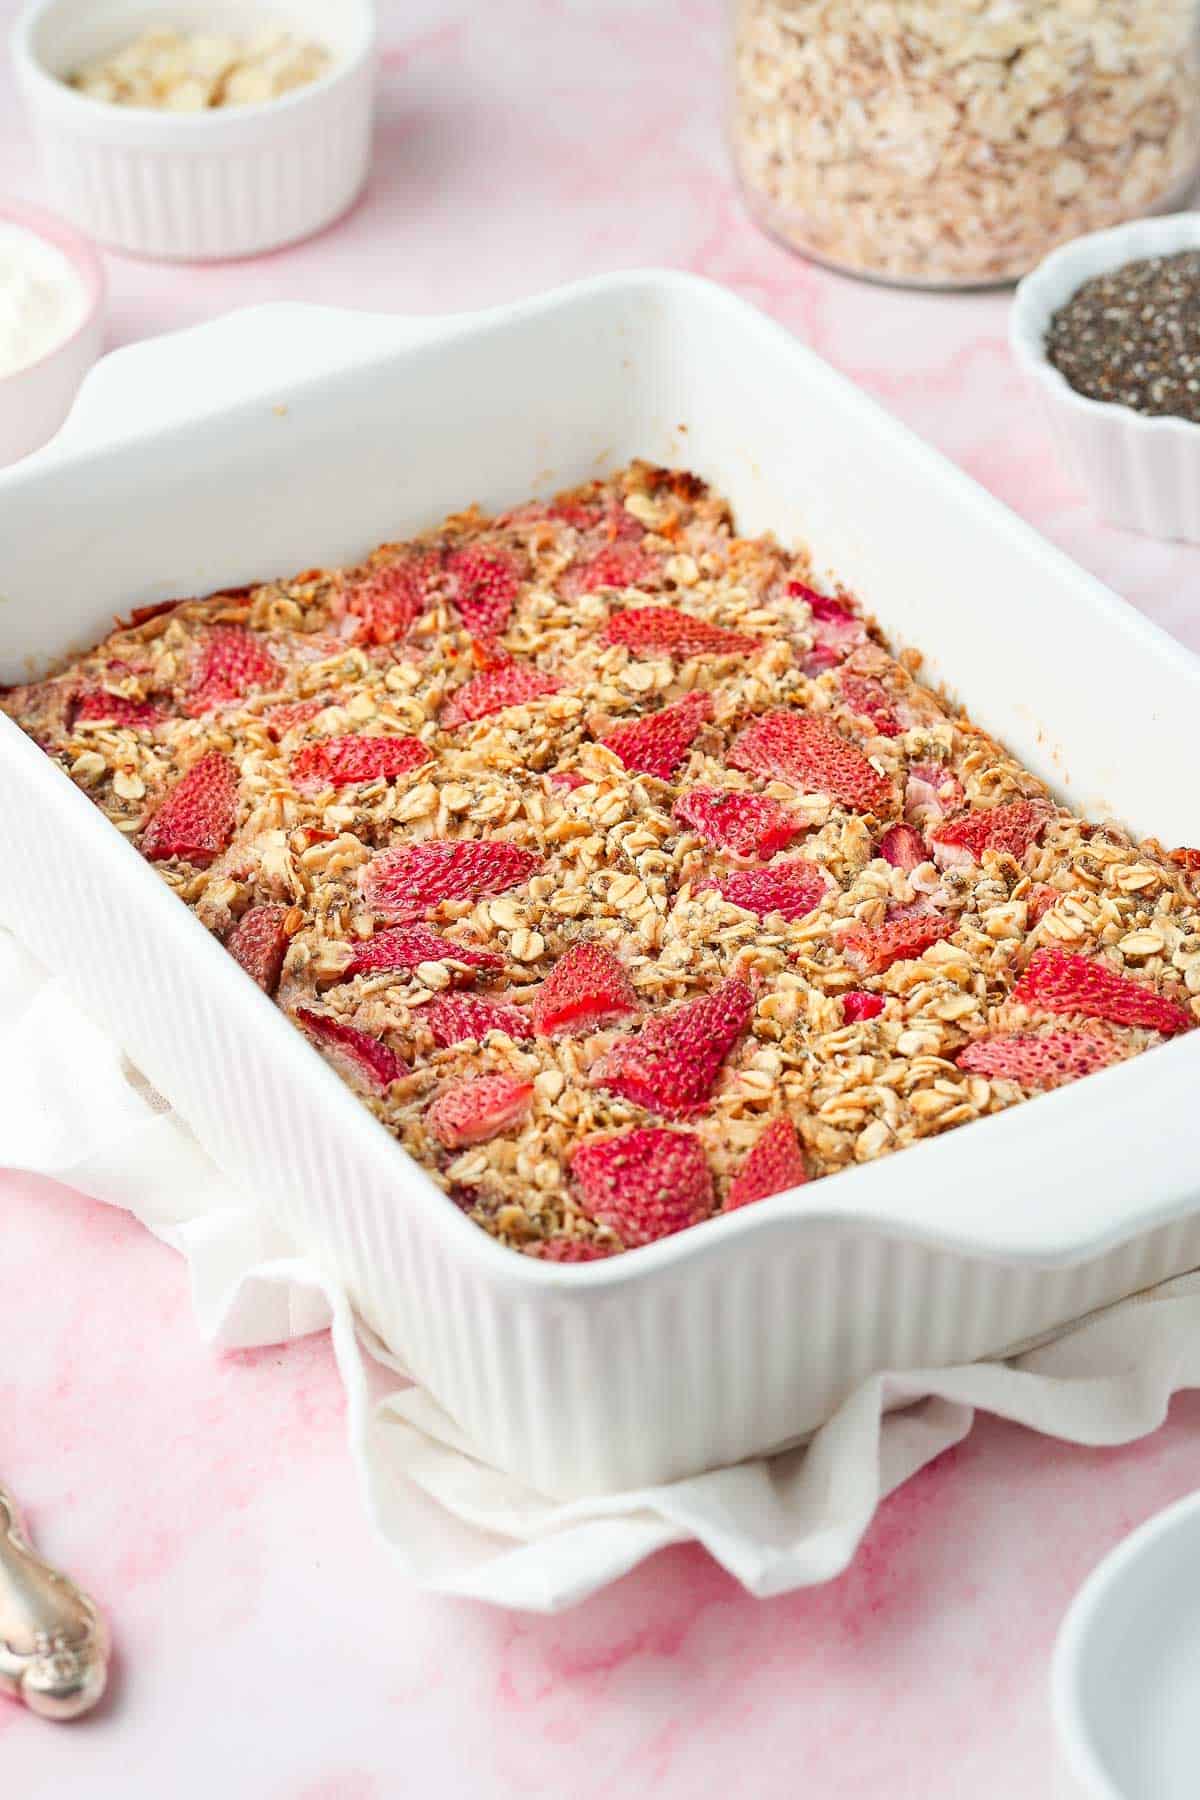 White rectangular dish of baked strawberry oatmeal, cut into six pieces.